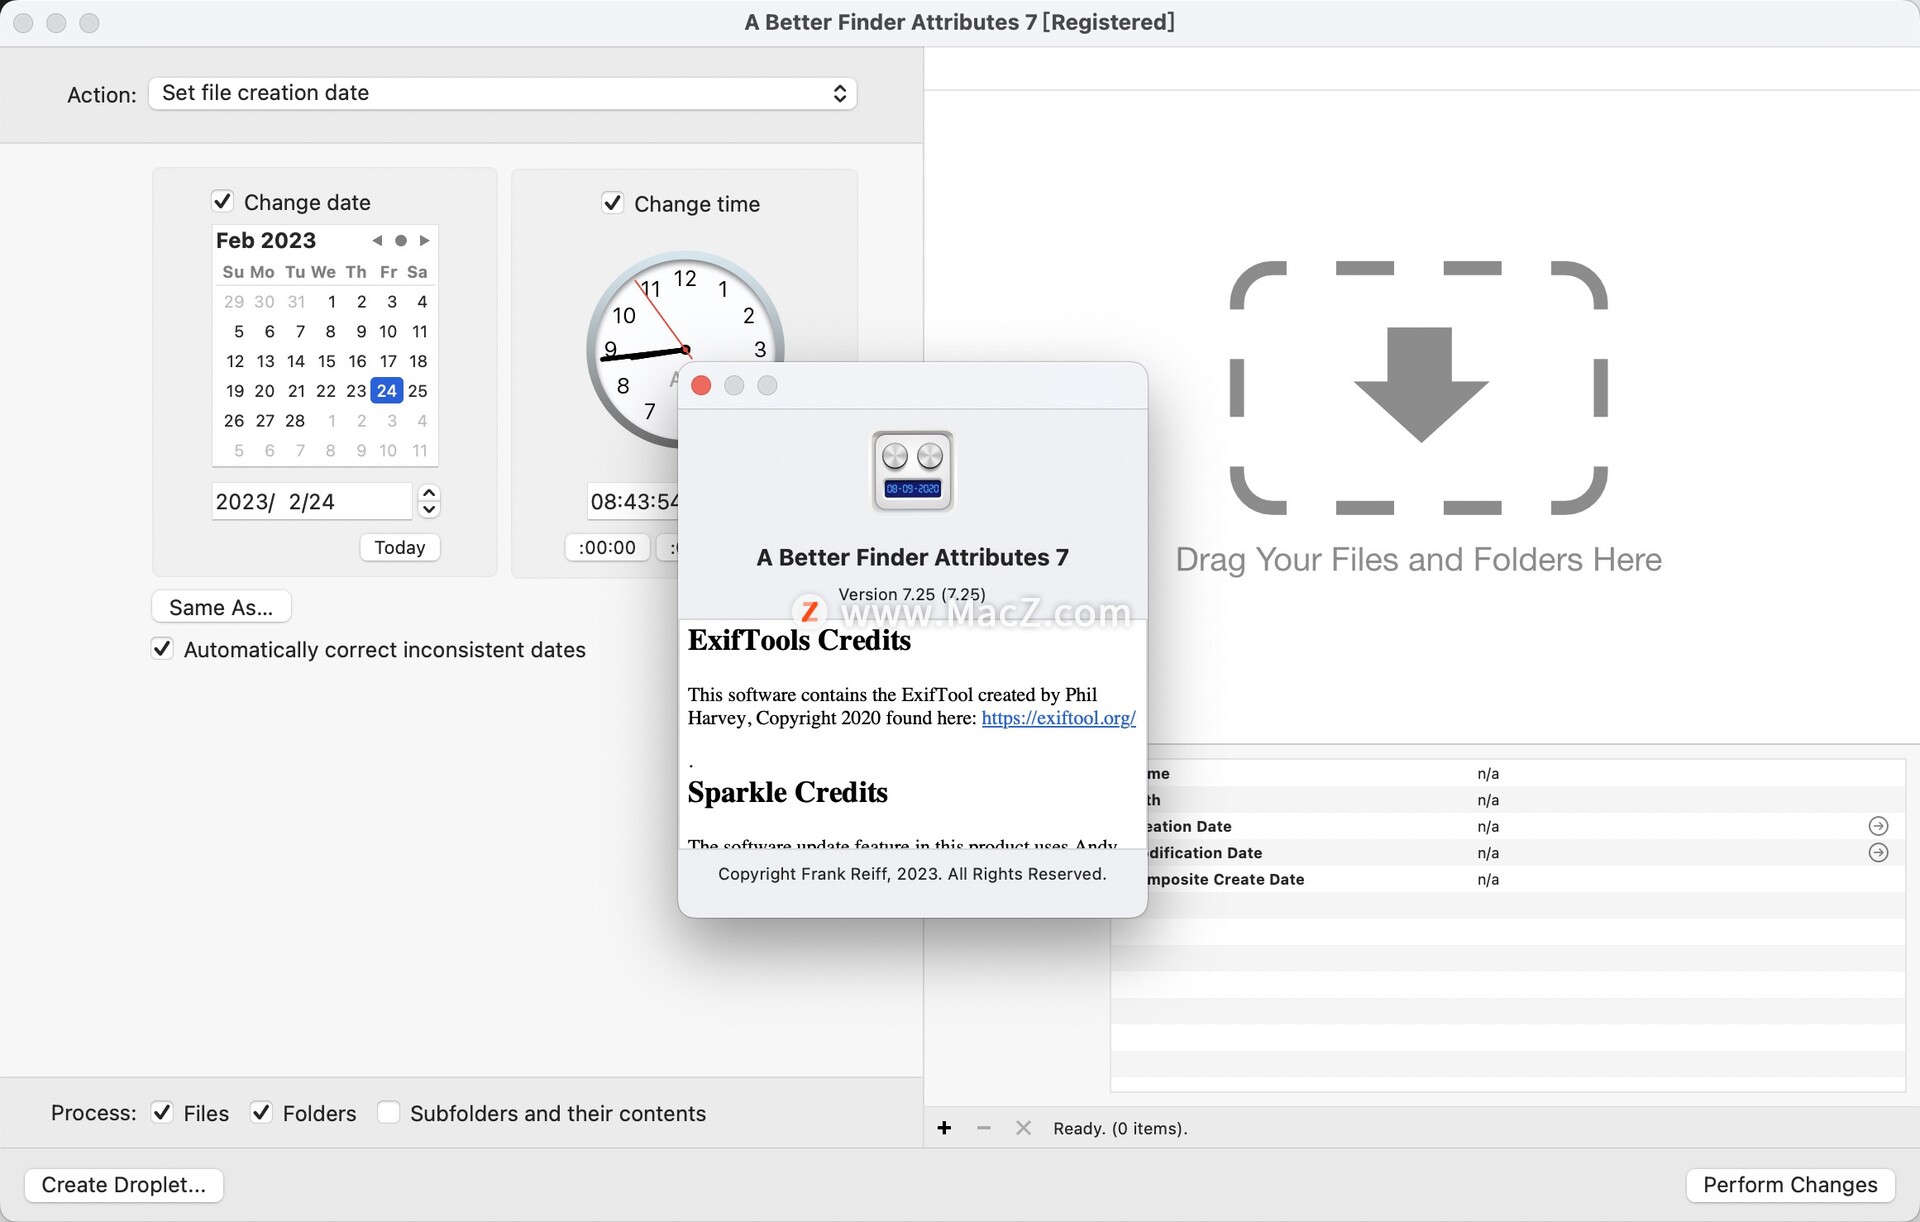 A Better Finder Attributes for apple download free